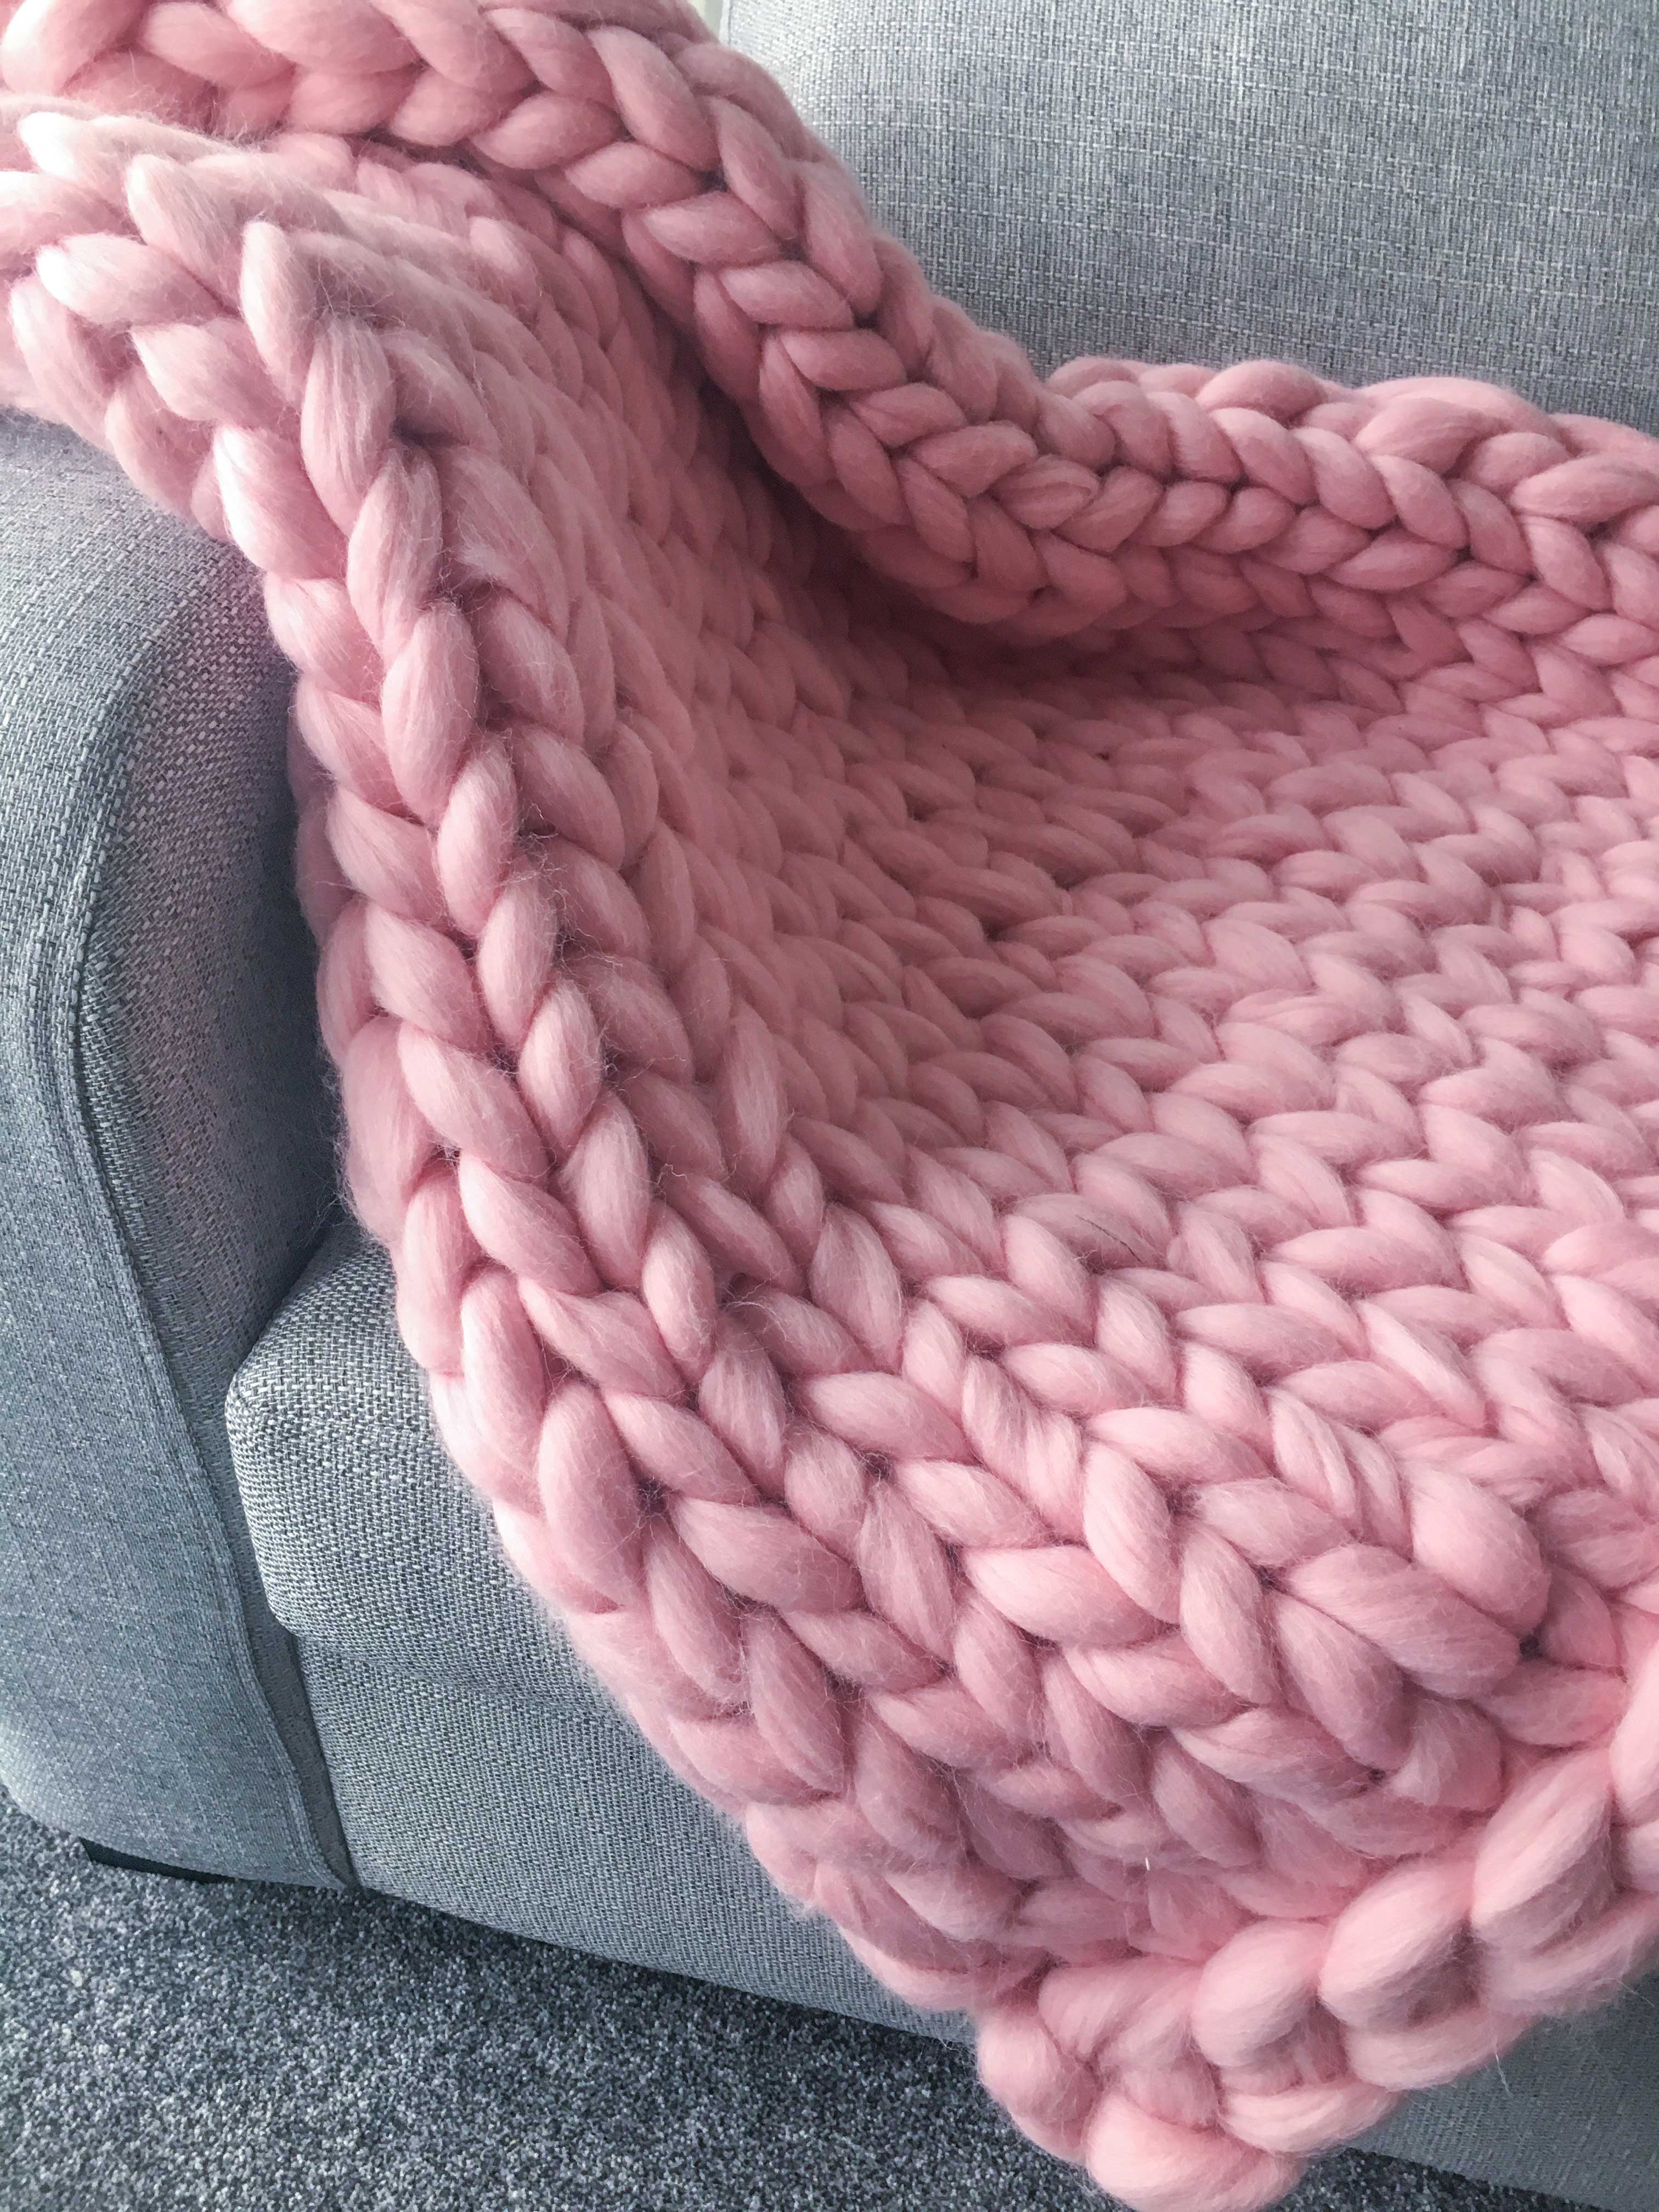 Giant Knit Blanket Handmade with 100 British Wool